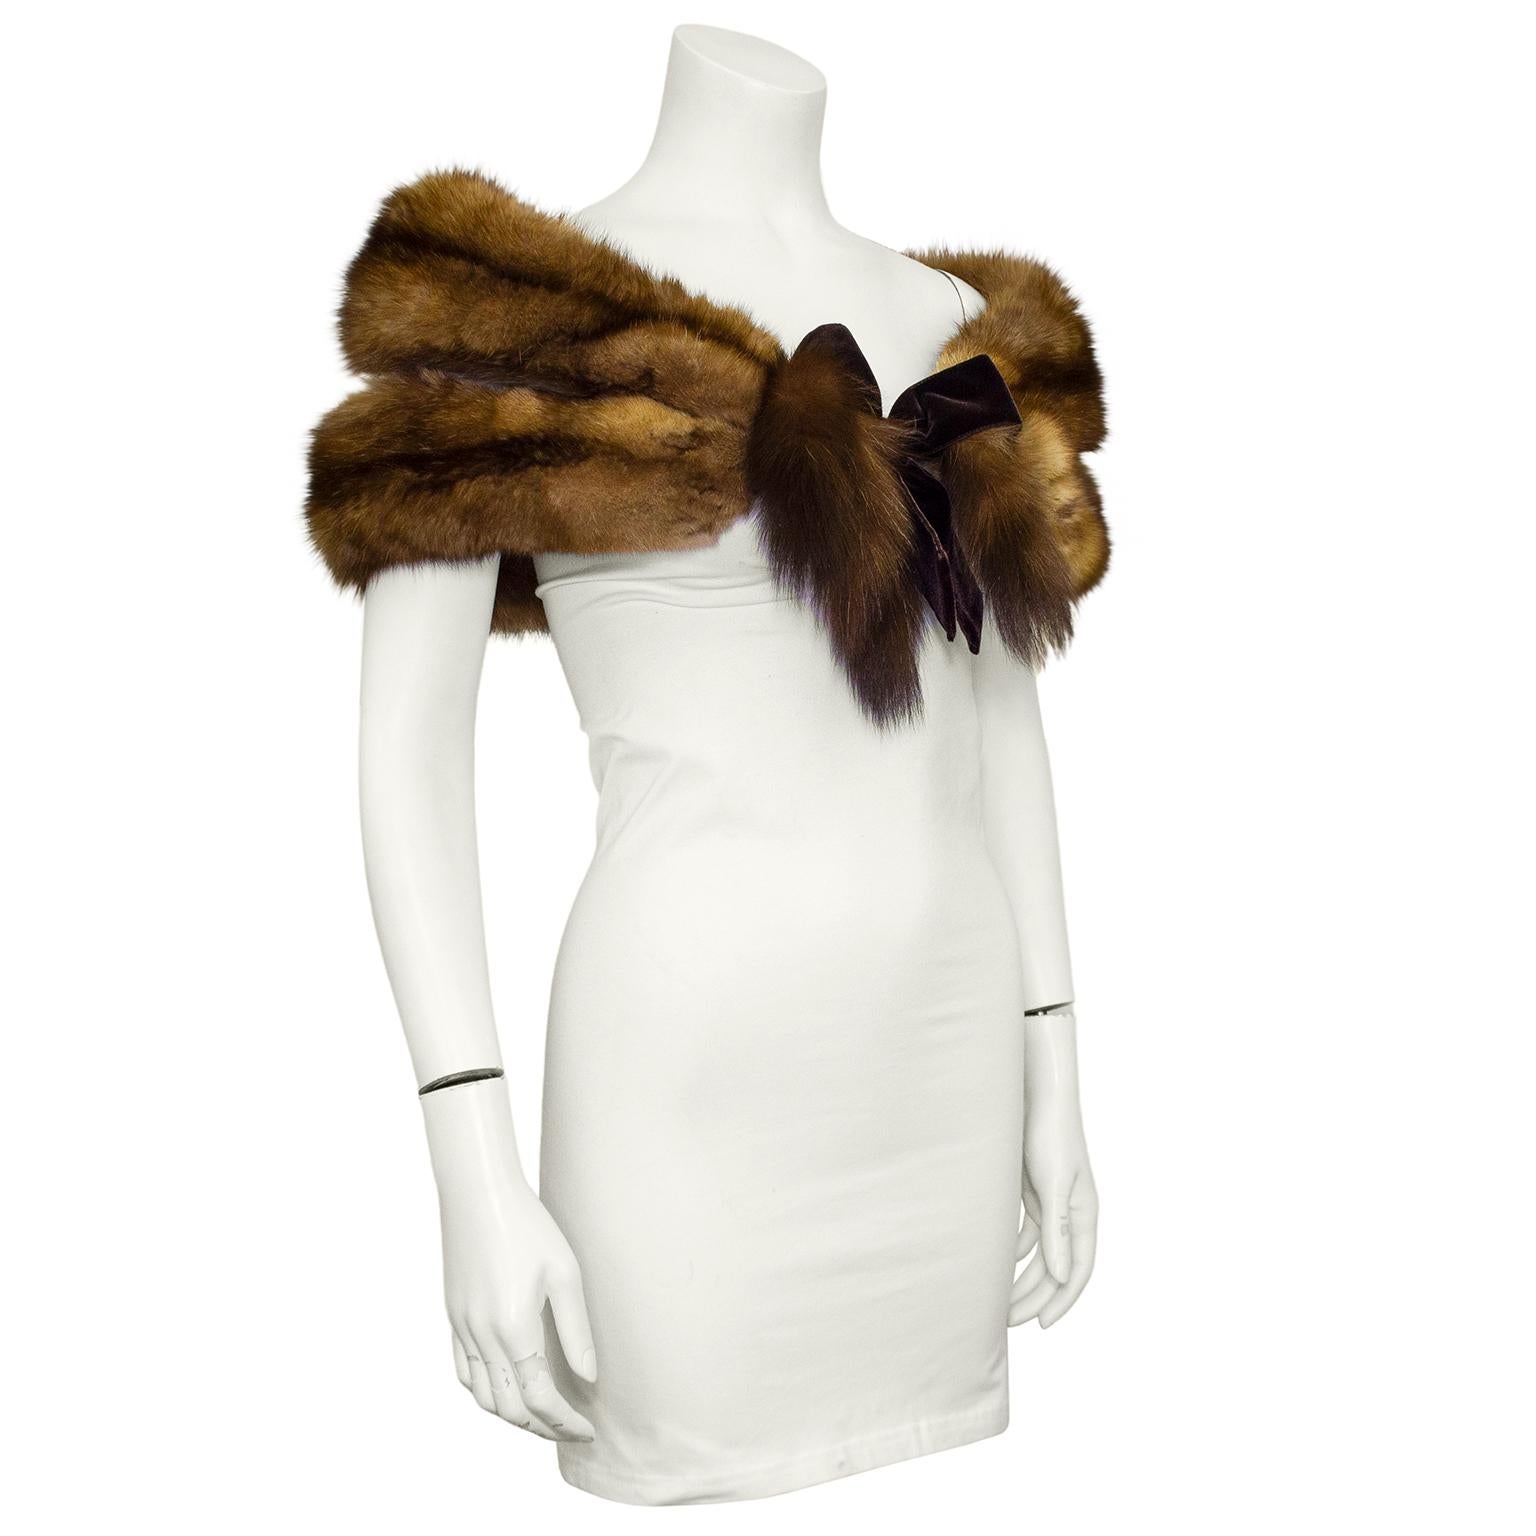 Elegant 1950's golden sable fur stole from the legendary Park Ave. shop De Pinna. Best known for dressing the boys of NYC who needed their suits tailored for prep school and for their stunning luxurious furs (most likely for the mothers of these 